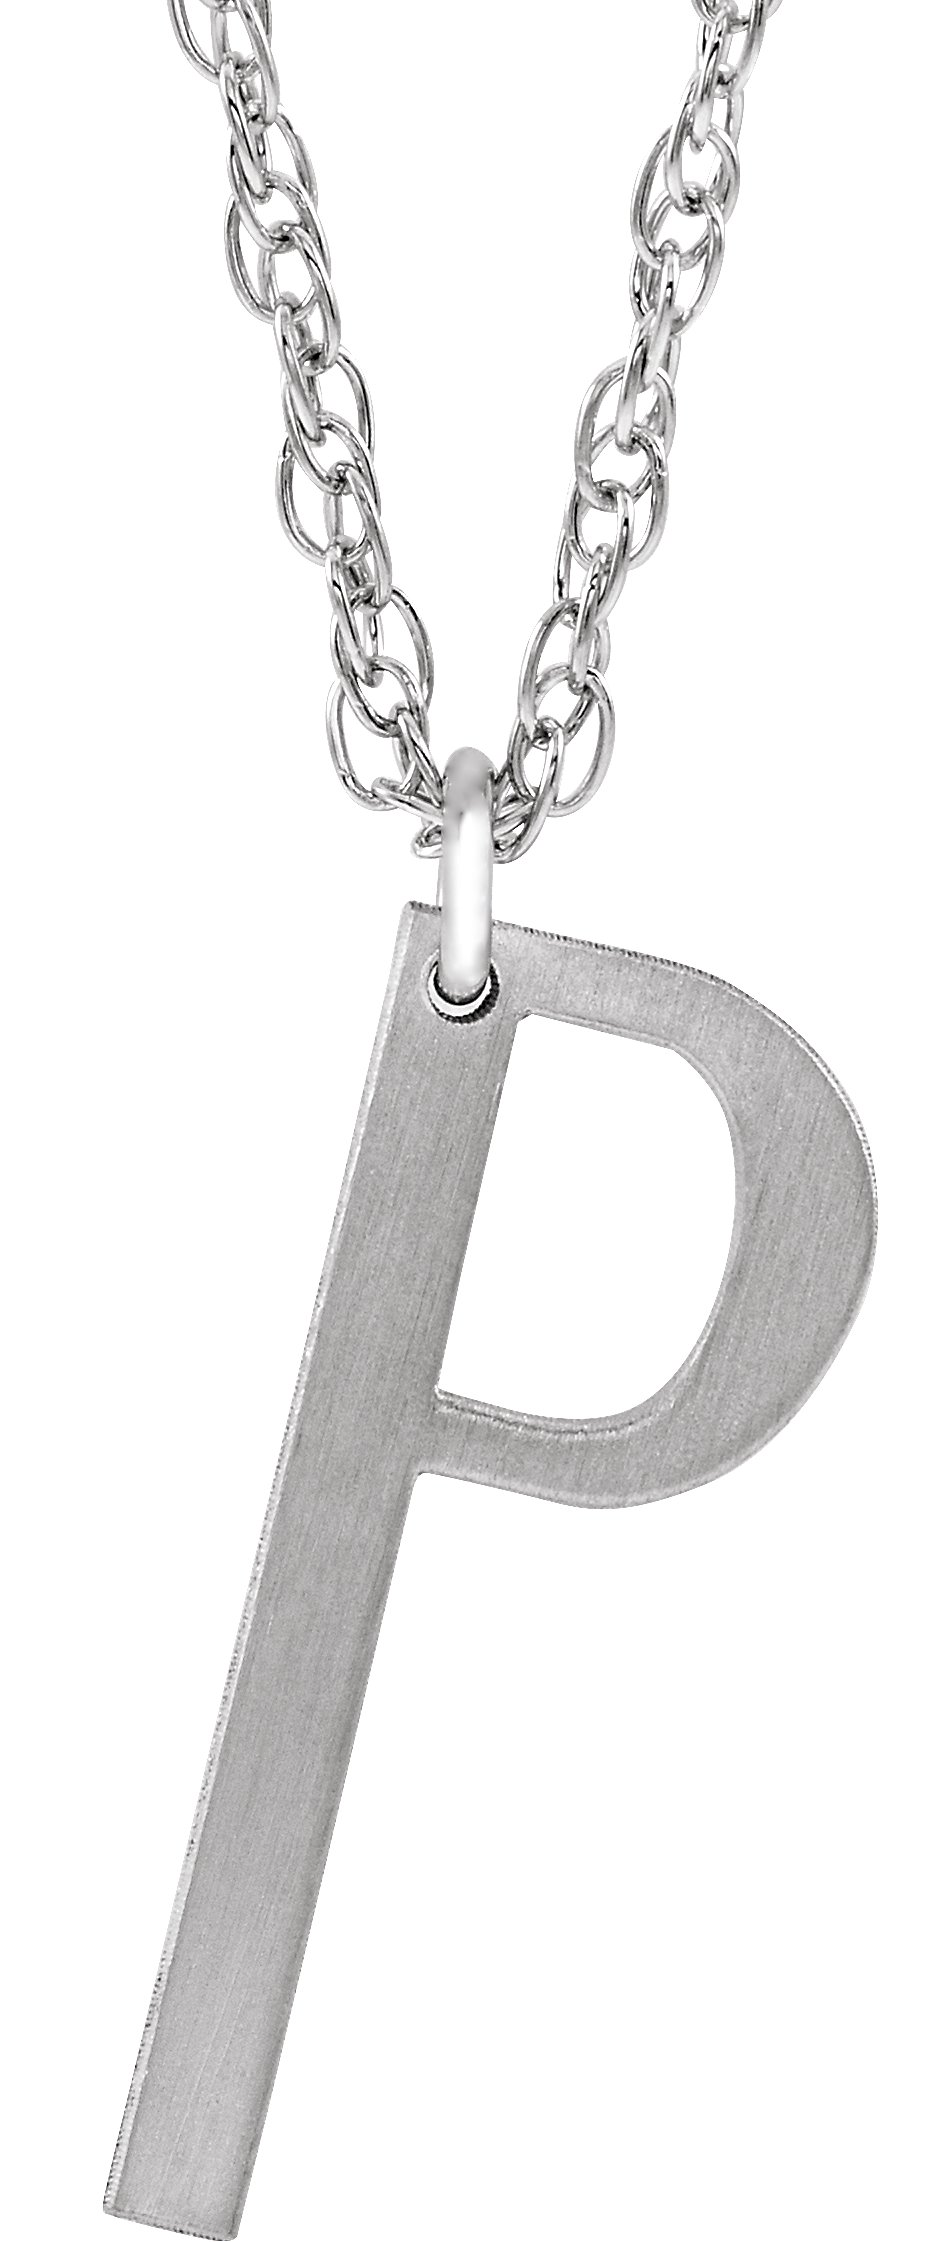 14K White Block Initial P 16-18" Necklace with Brush Finish